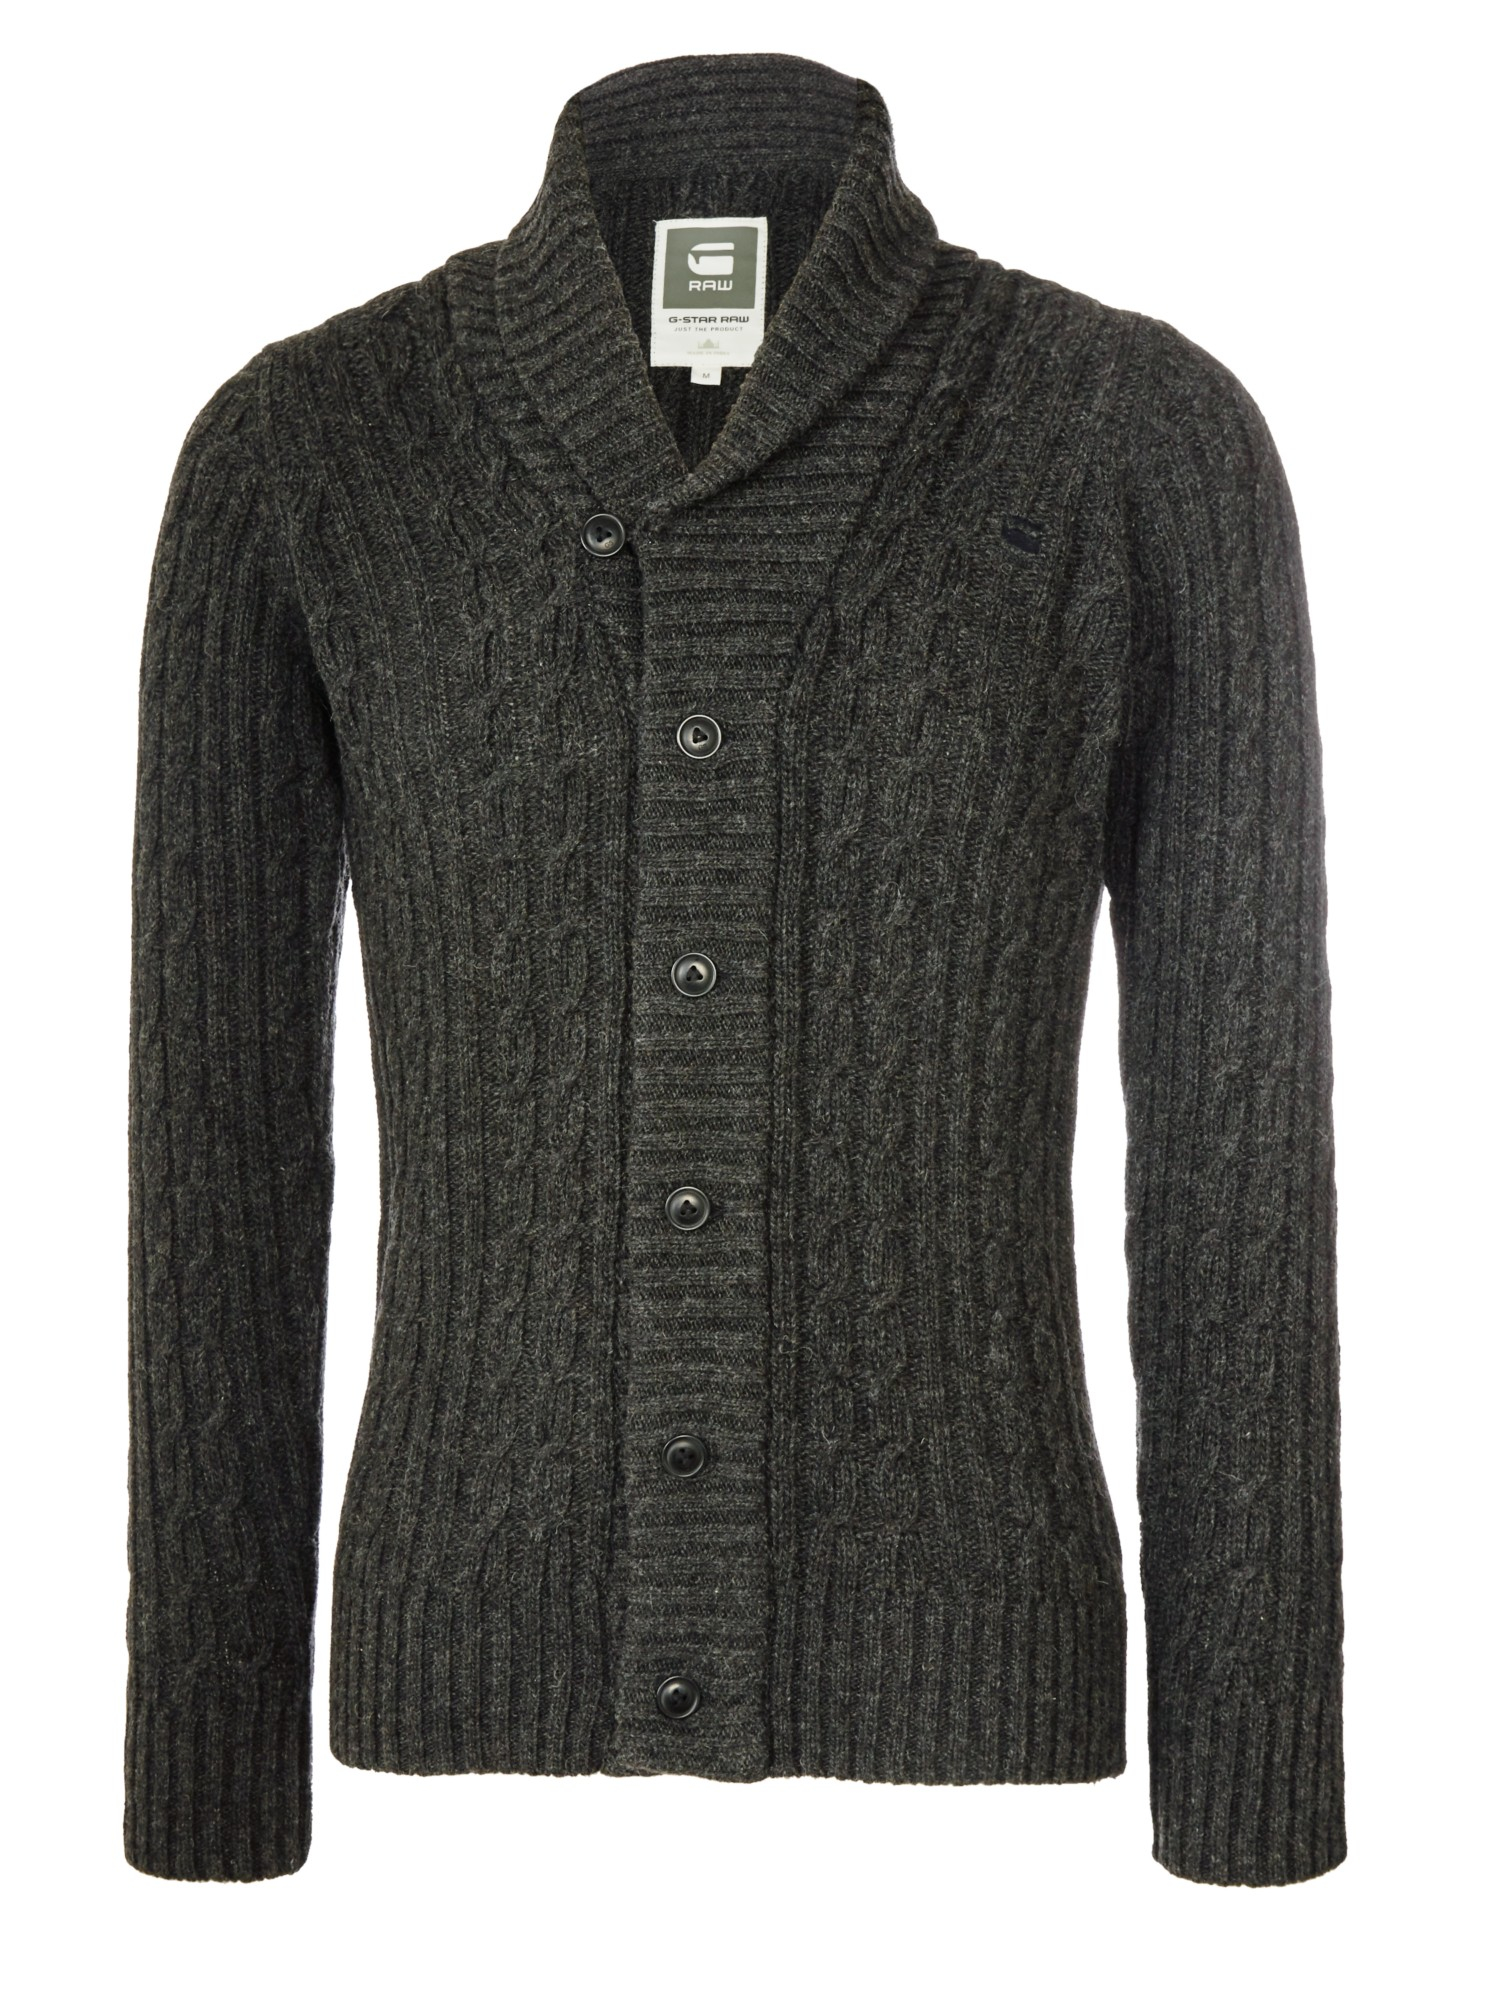 G-Star RAW Higging Cable Knit Cardigan in Black for Men - Lyst